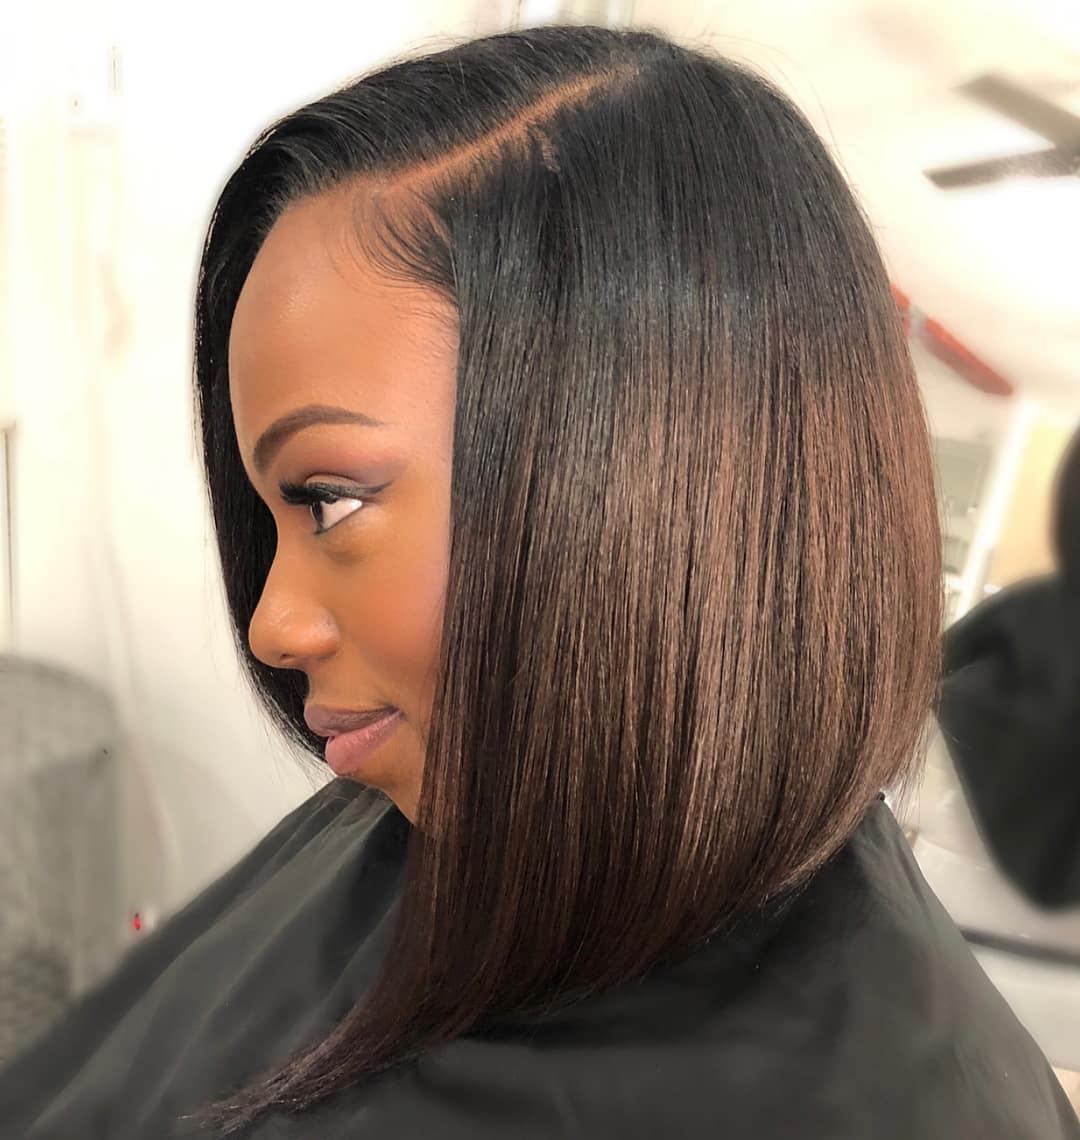 Outstanding Bob Hairstyles for Black Women | Bob-Hairstyle.Com | Short bob  hairstyles, Hair inspiration, Womens hairstyles